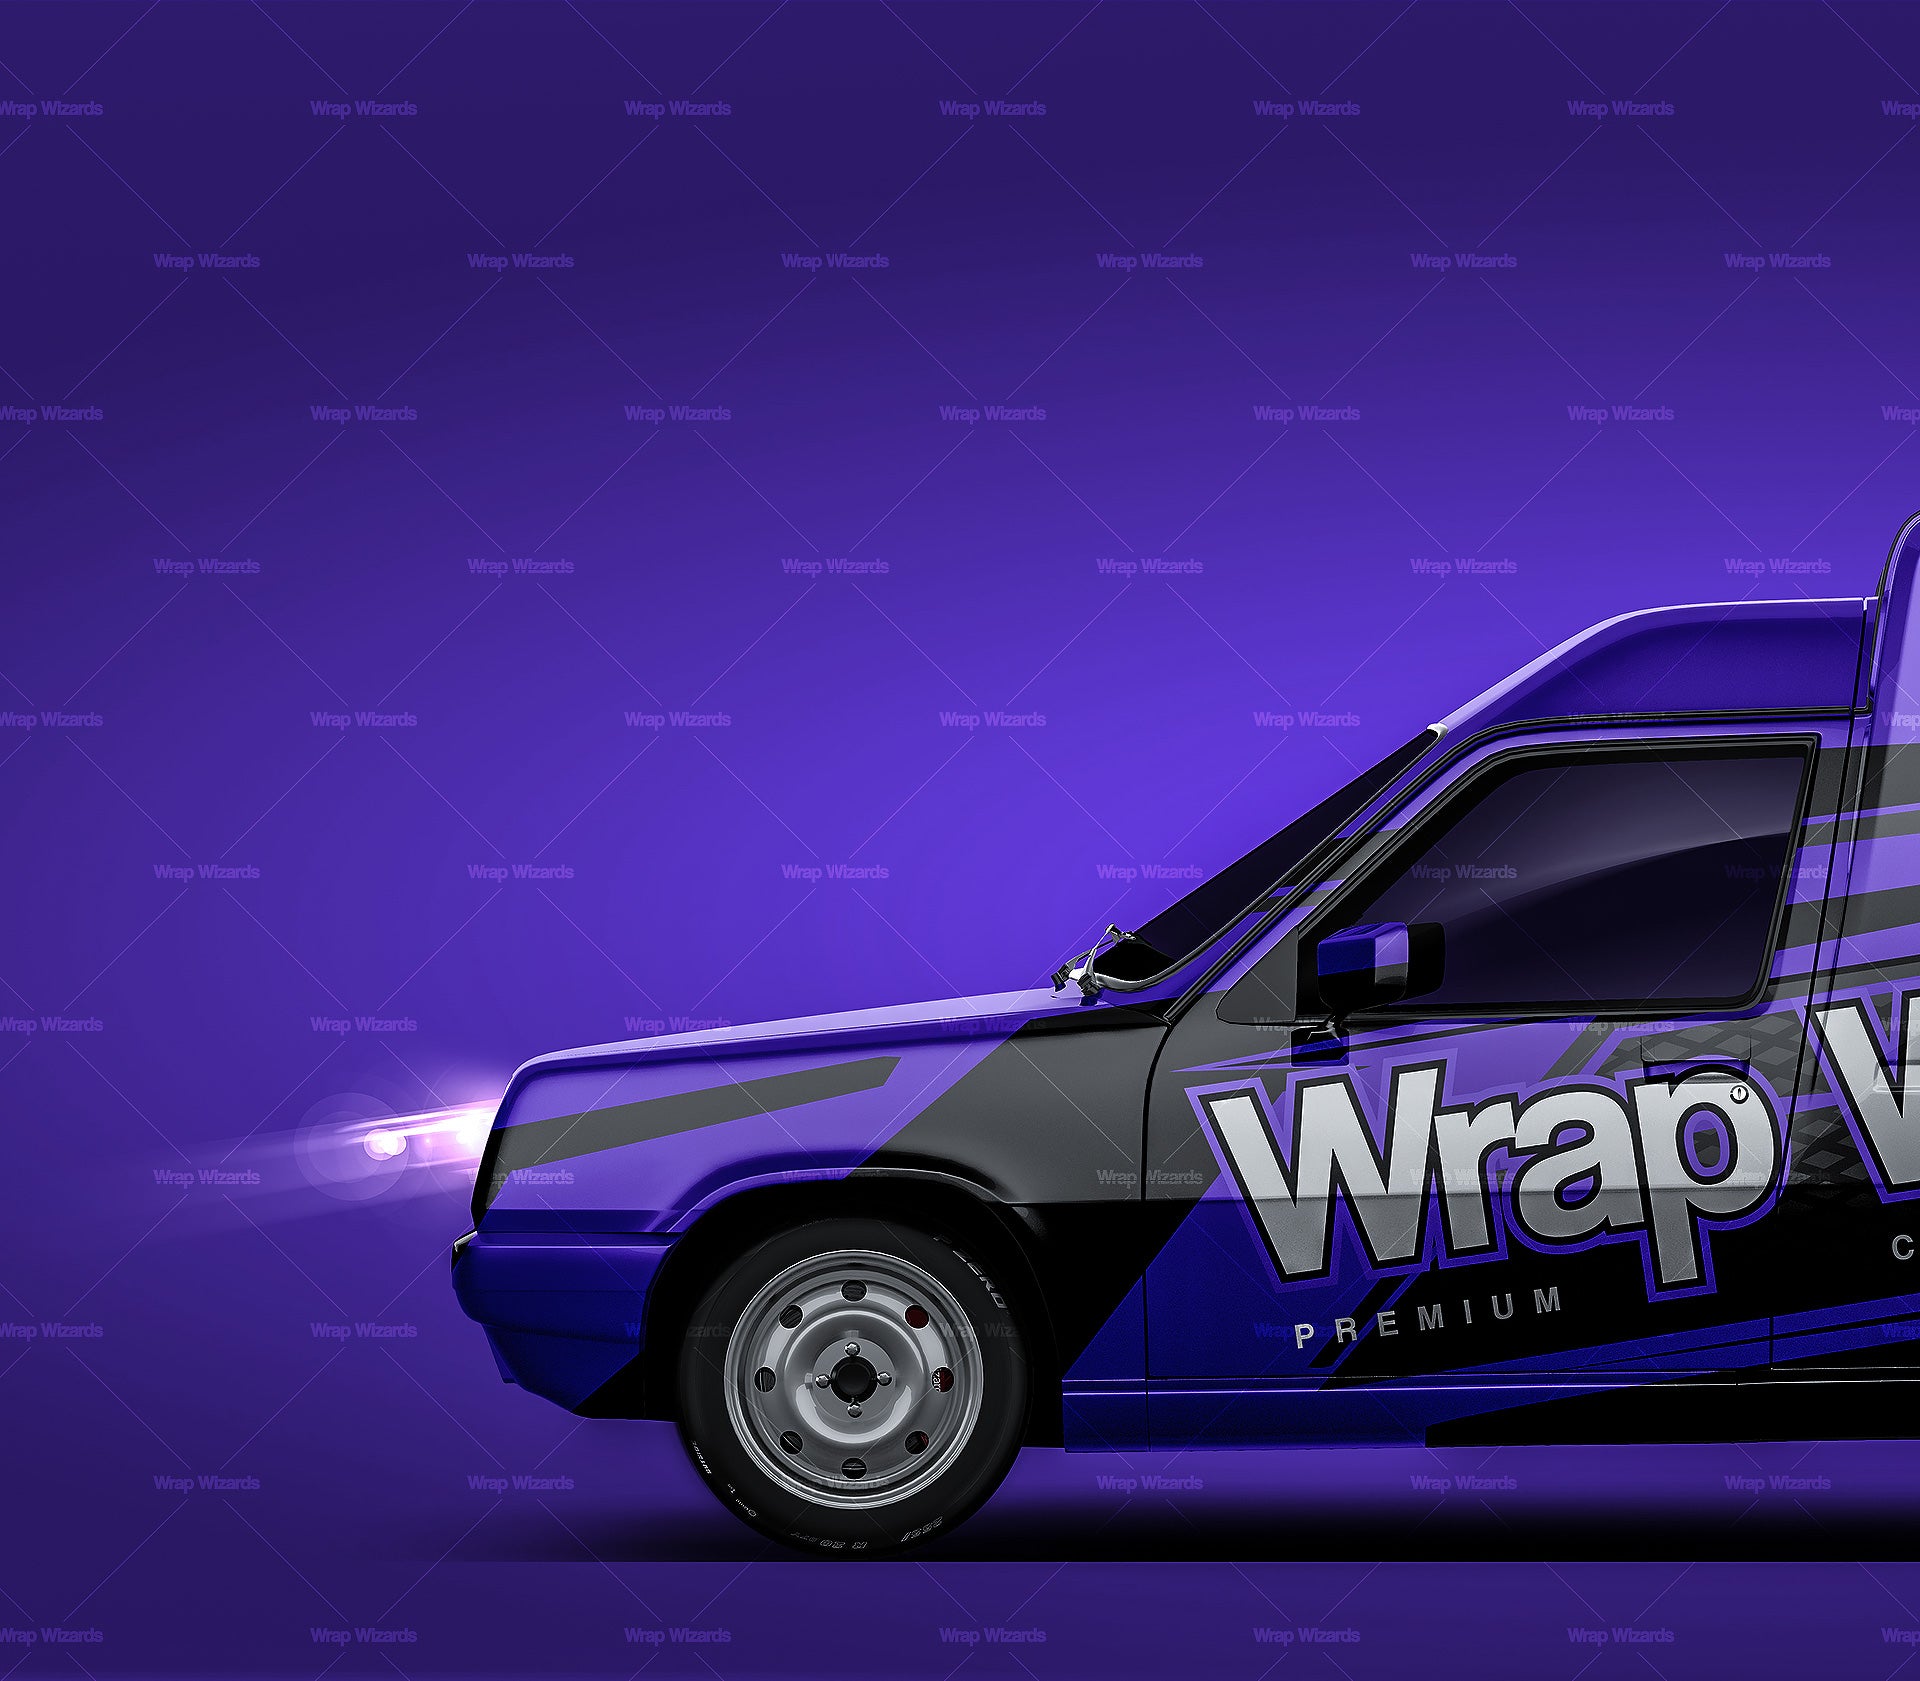 Renault Express glossy finish - all sides Car Mockup Template.psd